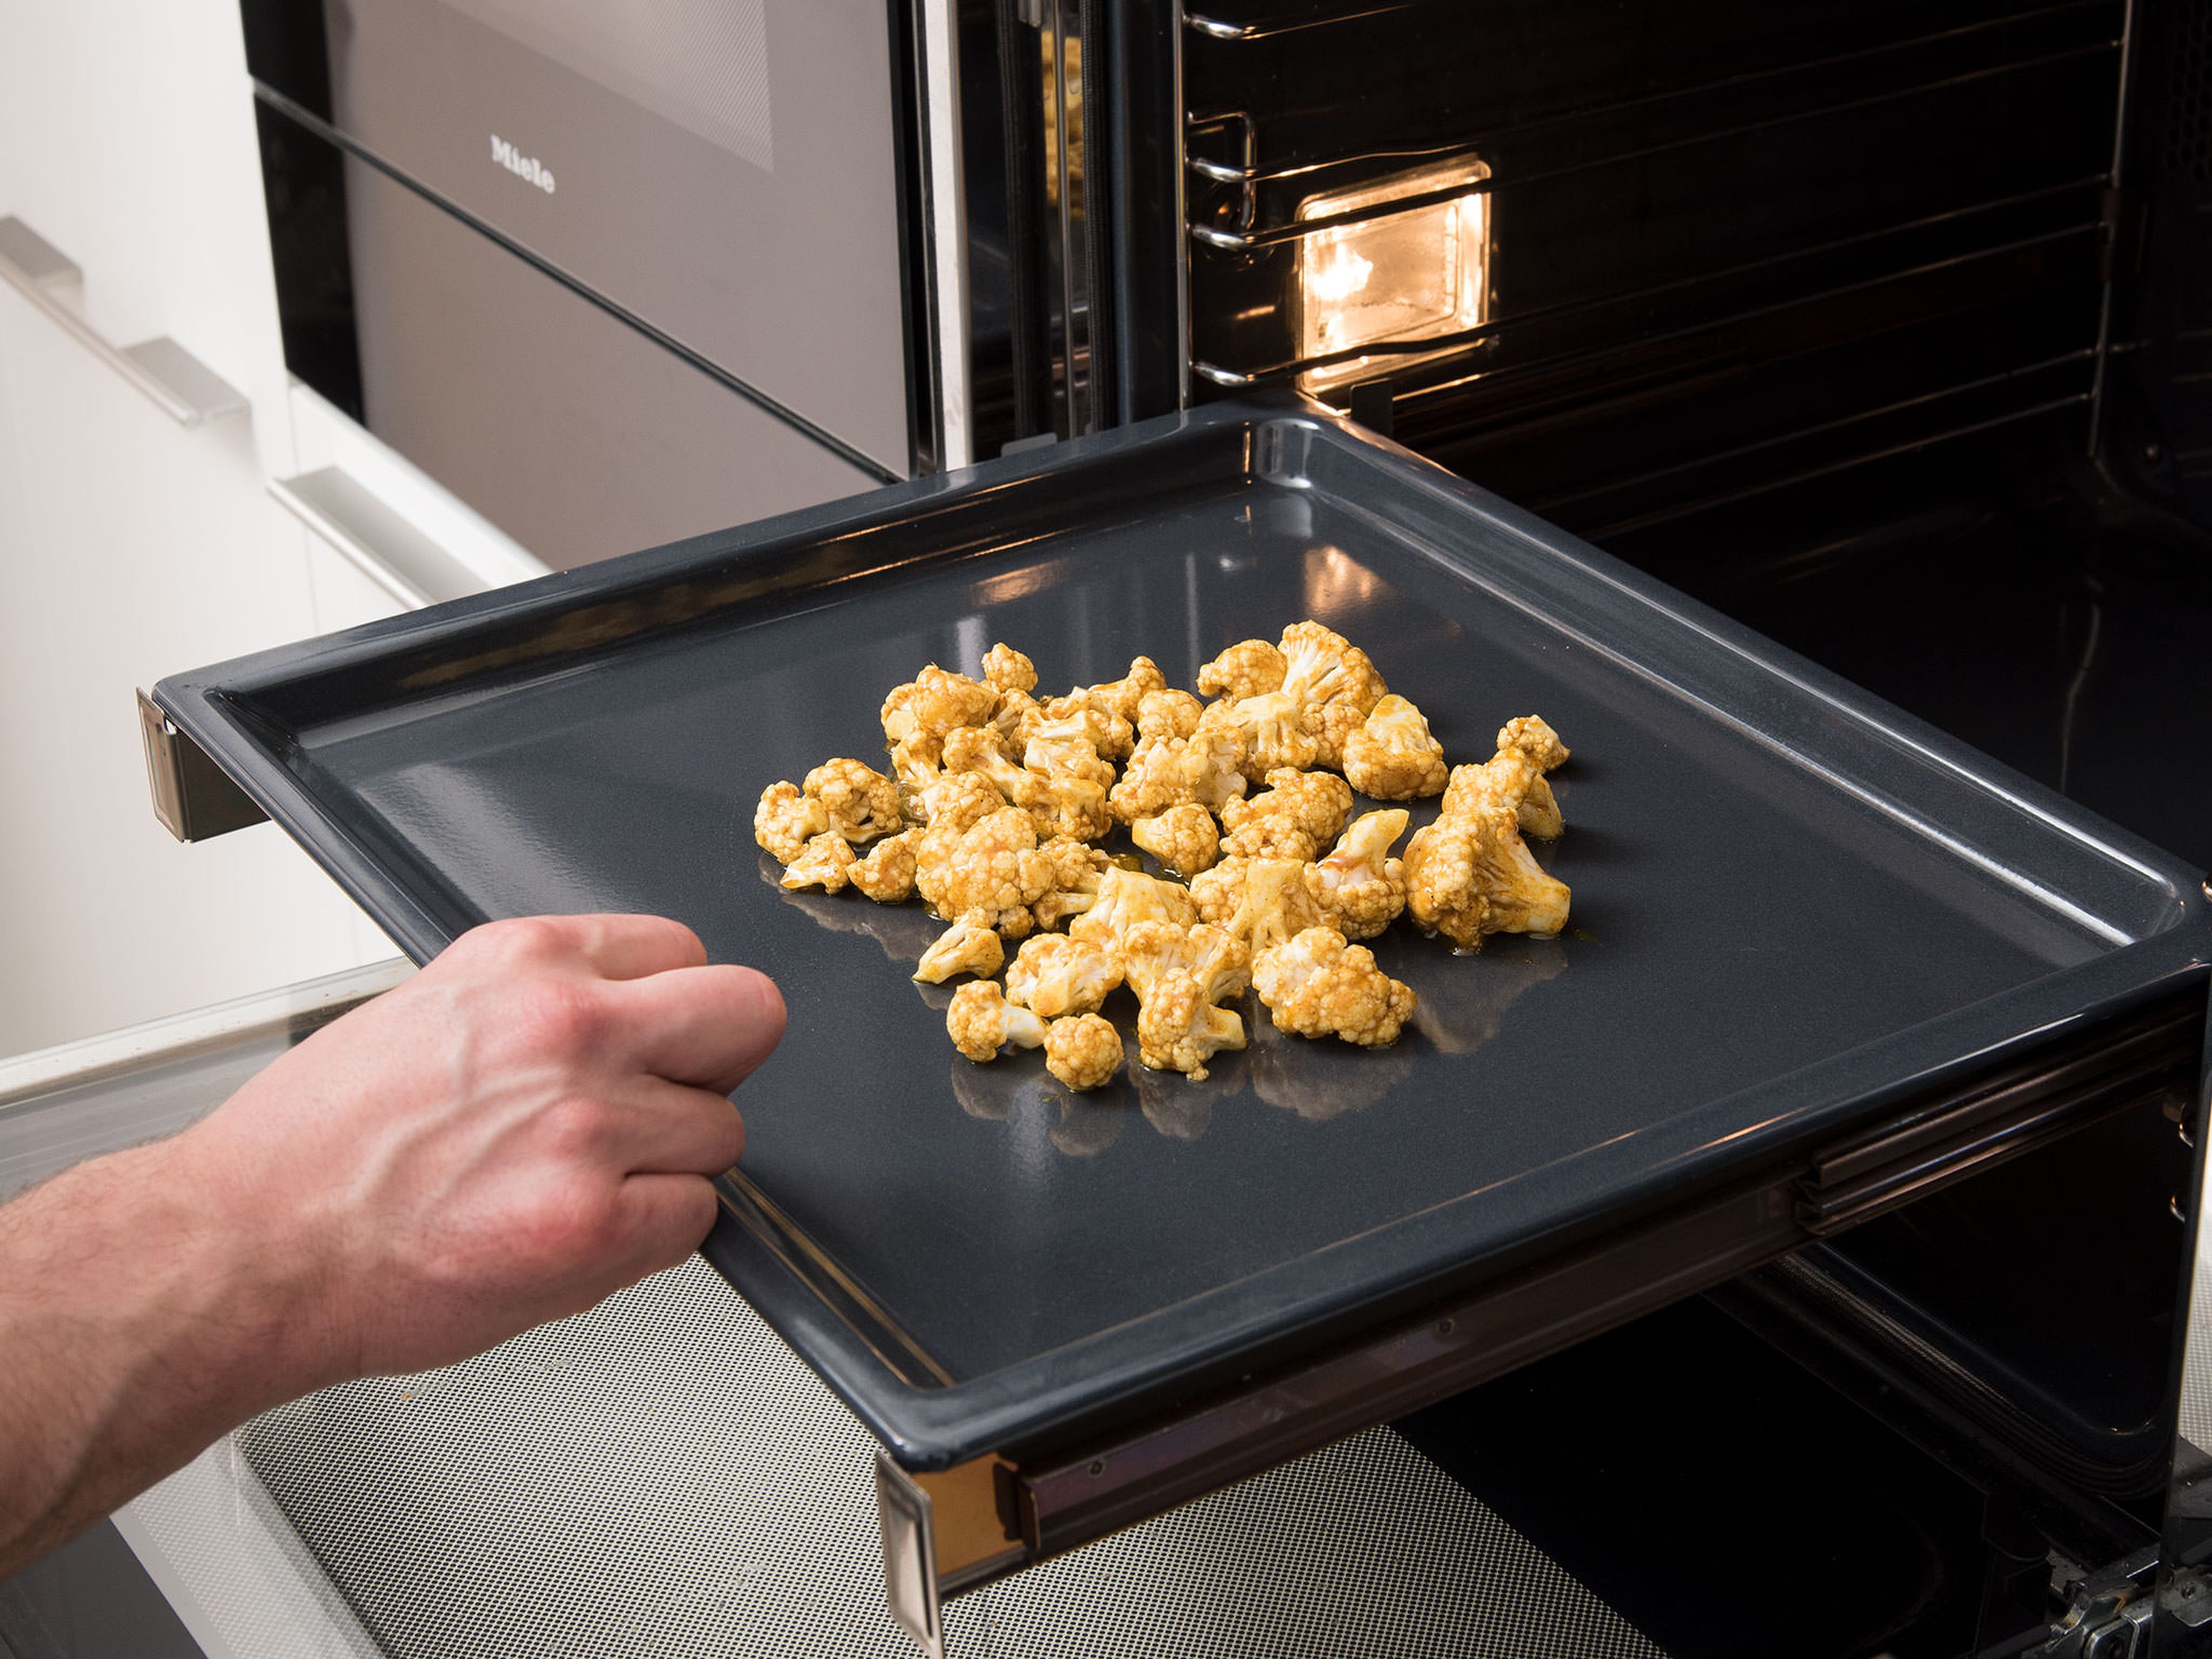 Transfer the marinated cauliflower onto a baking sheet. Roast in the preheated oven for approx. 25 min. or until slightly crispy. Set aside to cool.